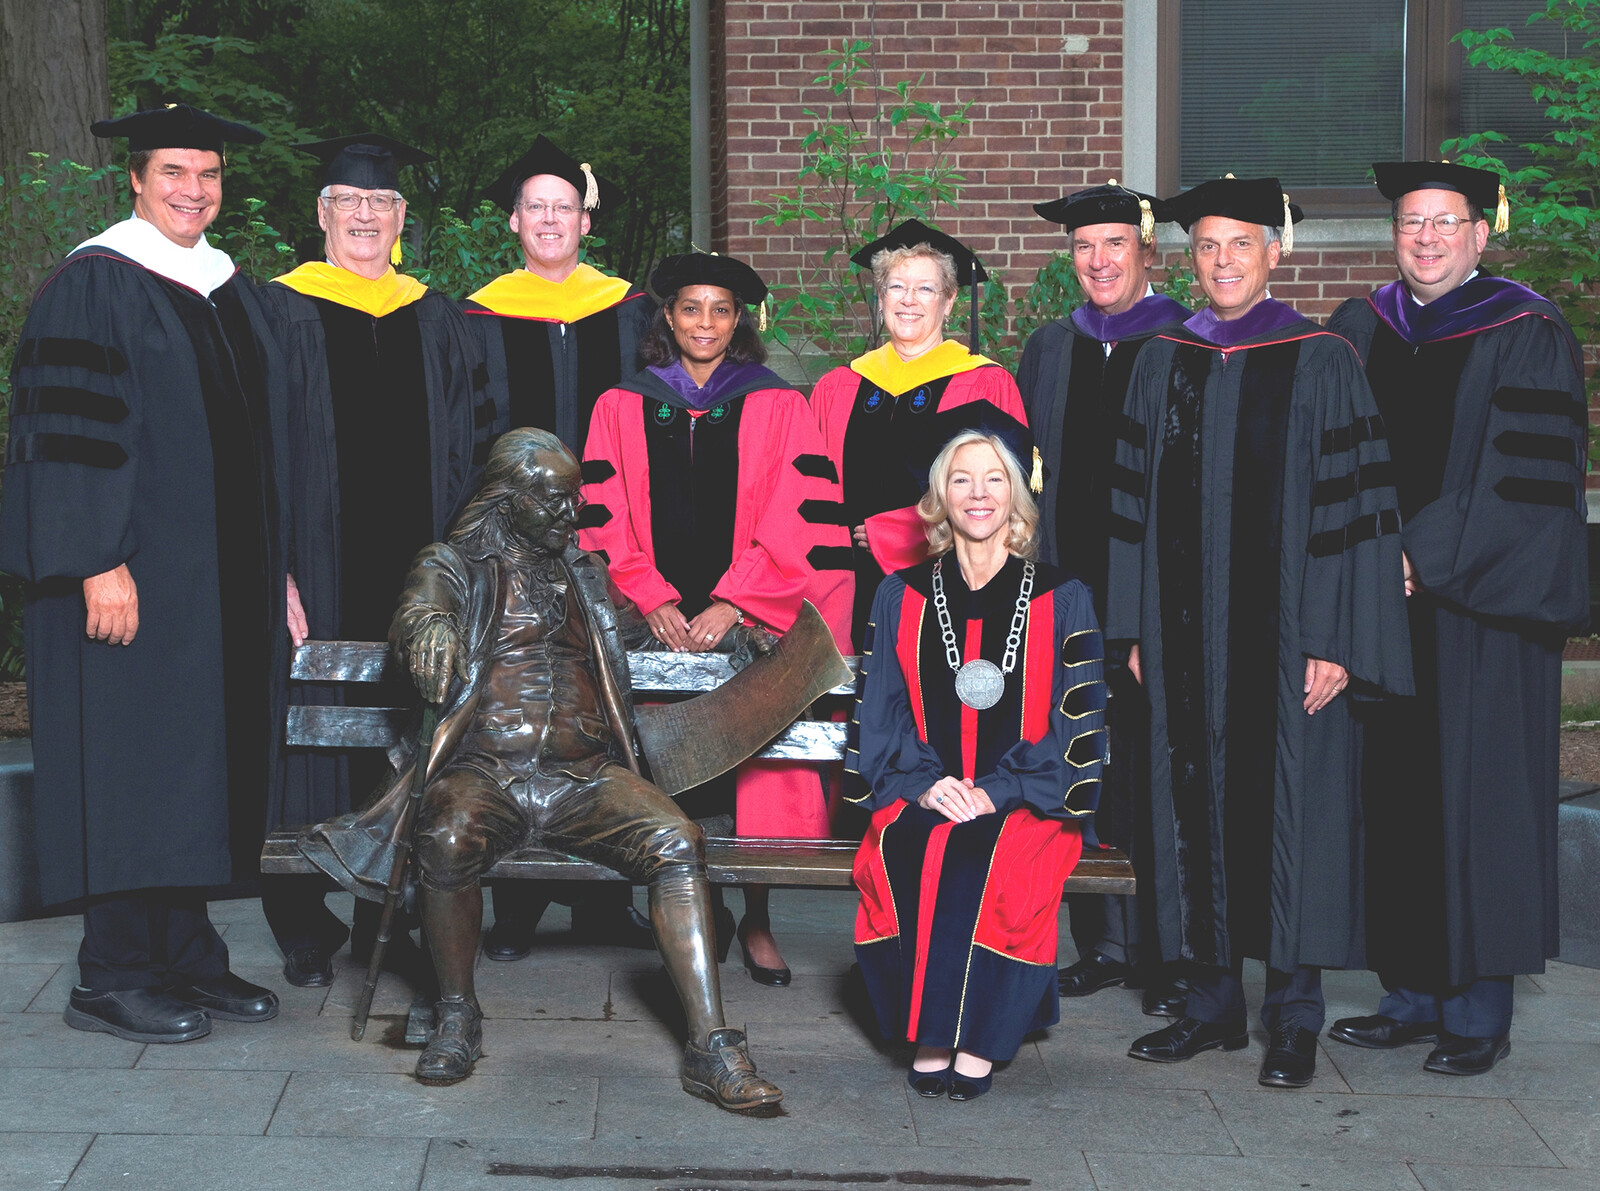 Amy Gutmann and 2010 Penn honorary degree recipients in regalia